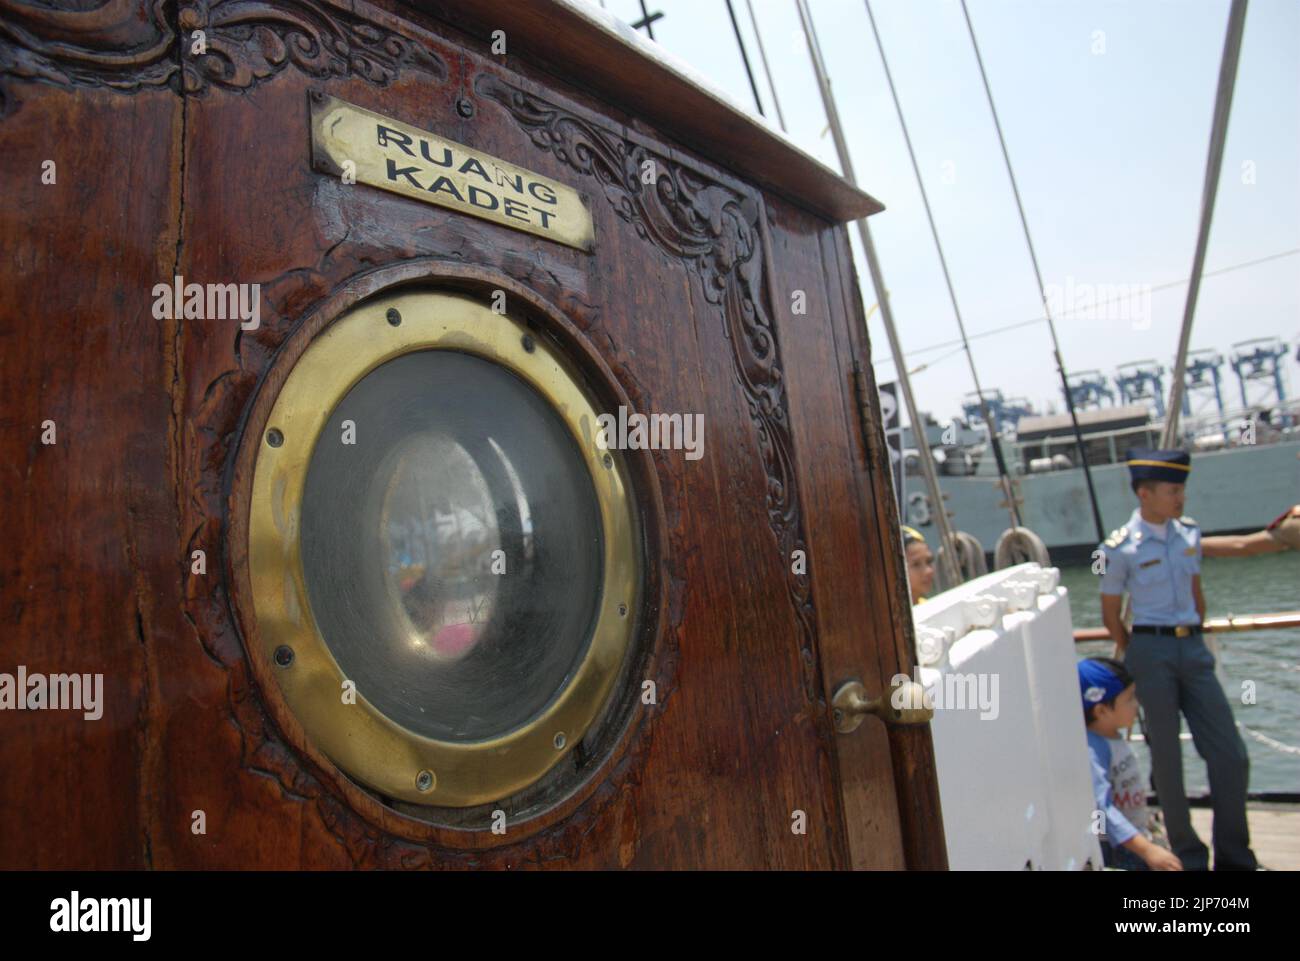 Rounded window glass on the door of cadet room on KRI Dewaruci (Dewa Ruci), an Indonesian tall ship, as the barquentine type schooner is opened for public visitors at Kolinlamil harbour (Navy harbour) in Tanjung Priok, North Jakarta, Jakarta, Indonesia. Stock Photo